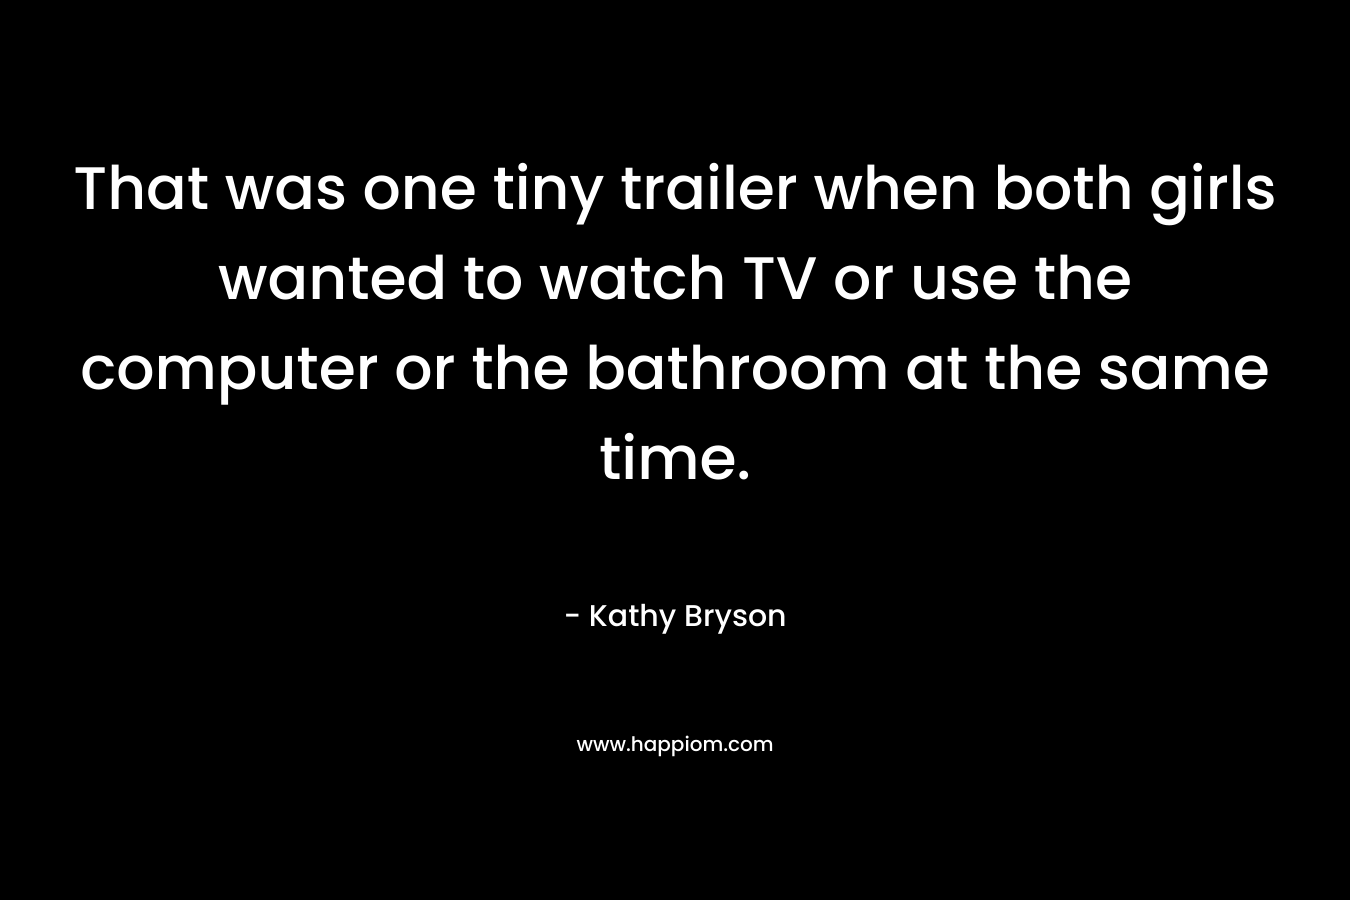 That was one tiny trailer when both girls wanted to watch TV or use the computer or the bathroom at the same time. – Kathy Bryson